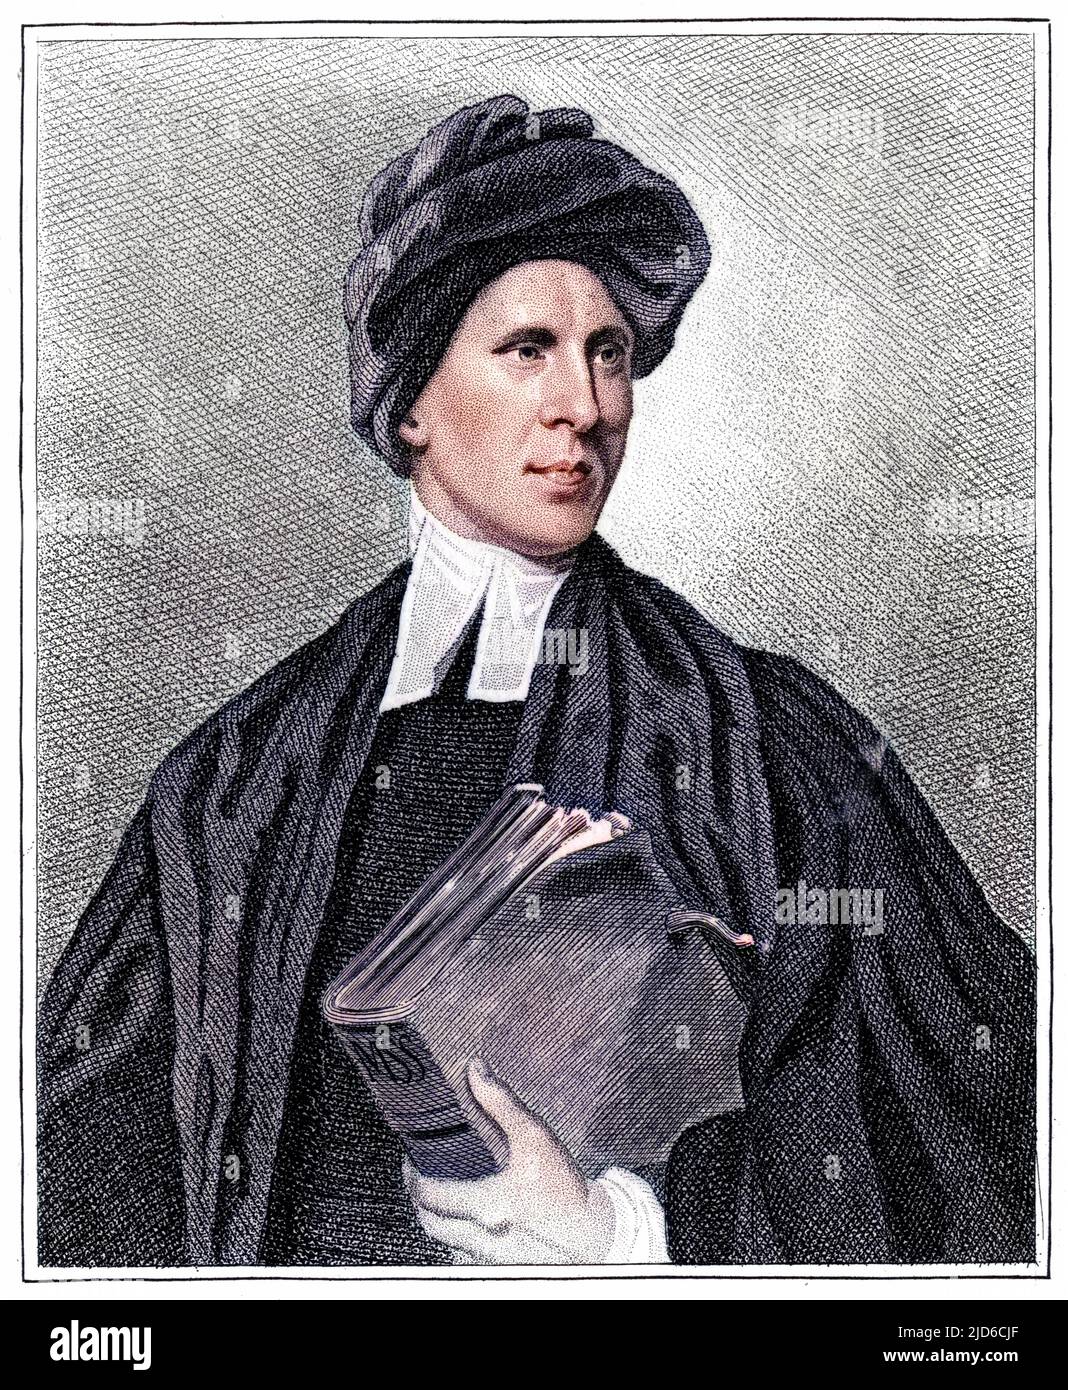 THOMAS PERCY Irish churchman, bishop of Dromore, scholar and antiquary, best known for his Reliques of Ancient English Poetry. Colourised version of : 10172414       Date: 1729 - 1811 Stock Photo